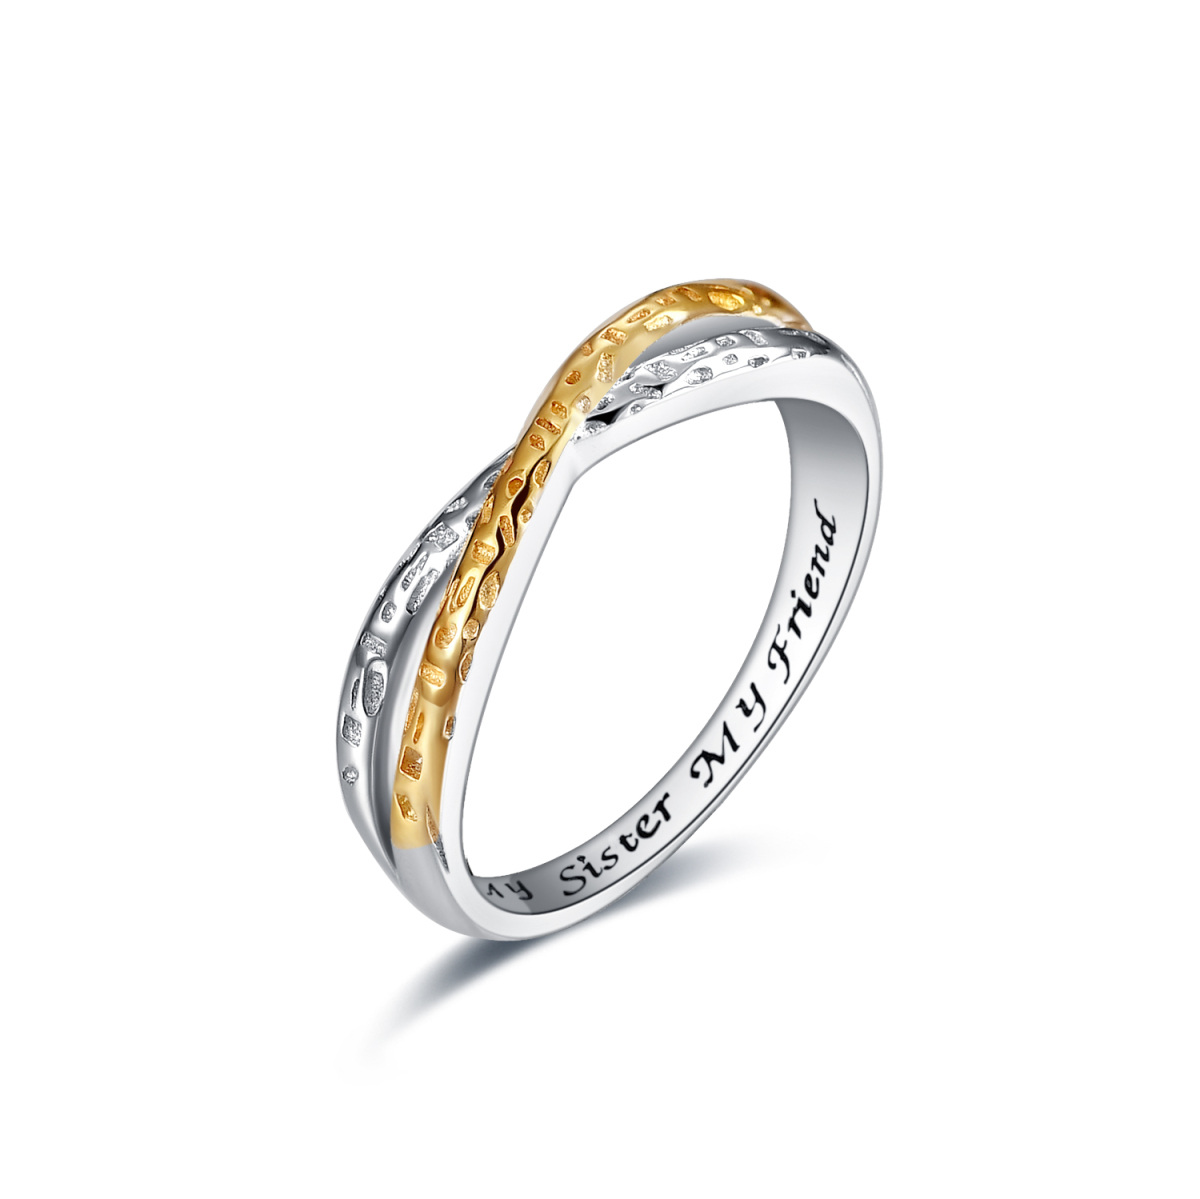 Sterling Silver Two-tone Infinity Symbol Ring with Engraved Word-1